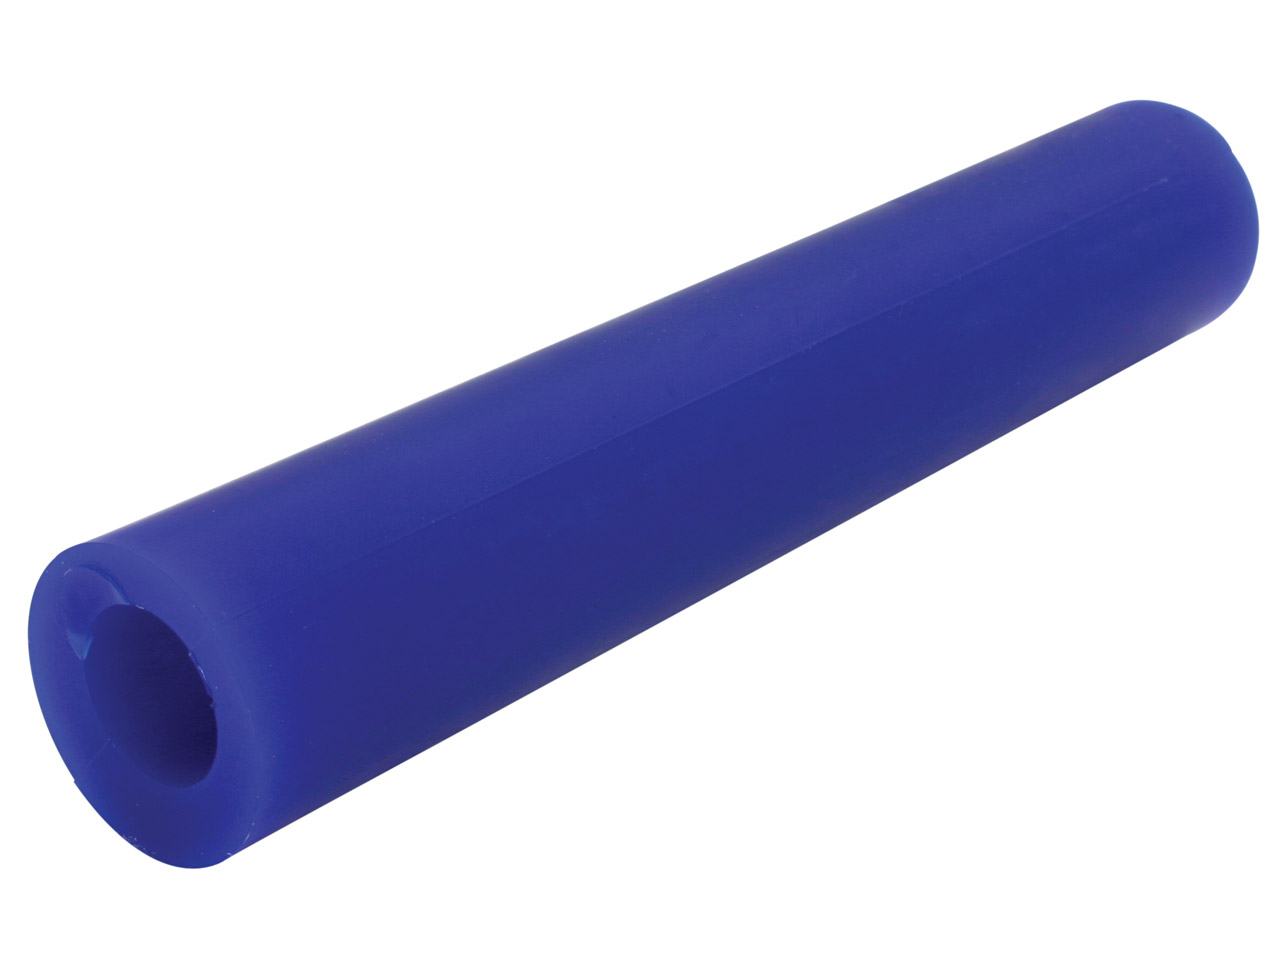 Ferris Round Wax Tube With Off Centre Hole, Blue, 152mm/6 Questions & Answers